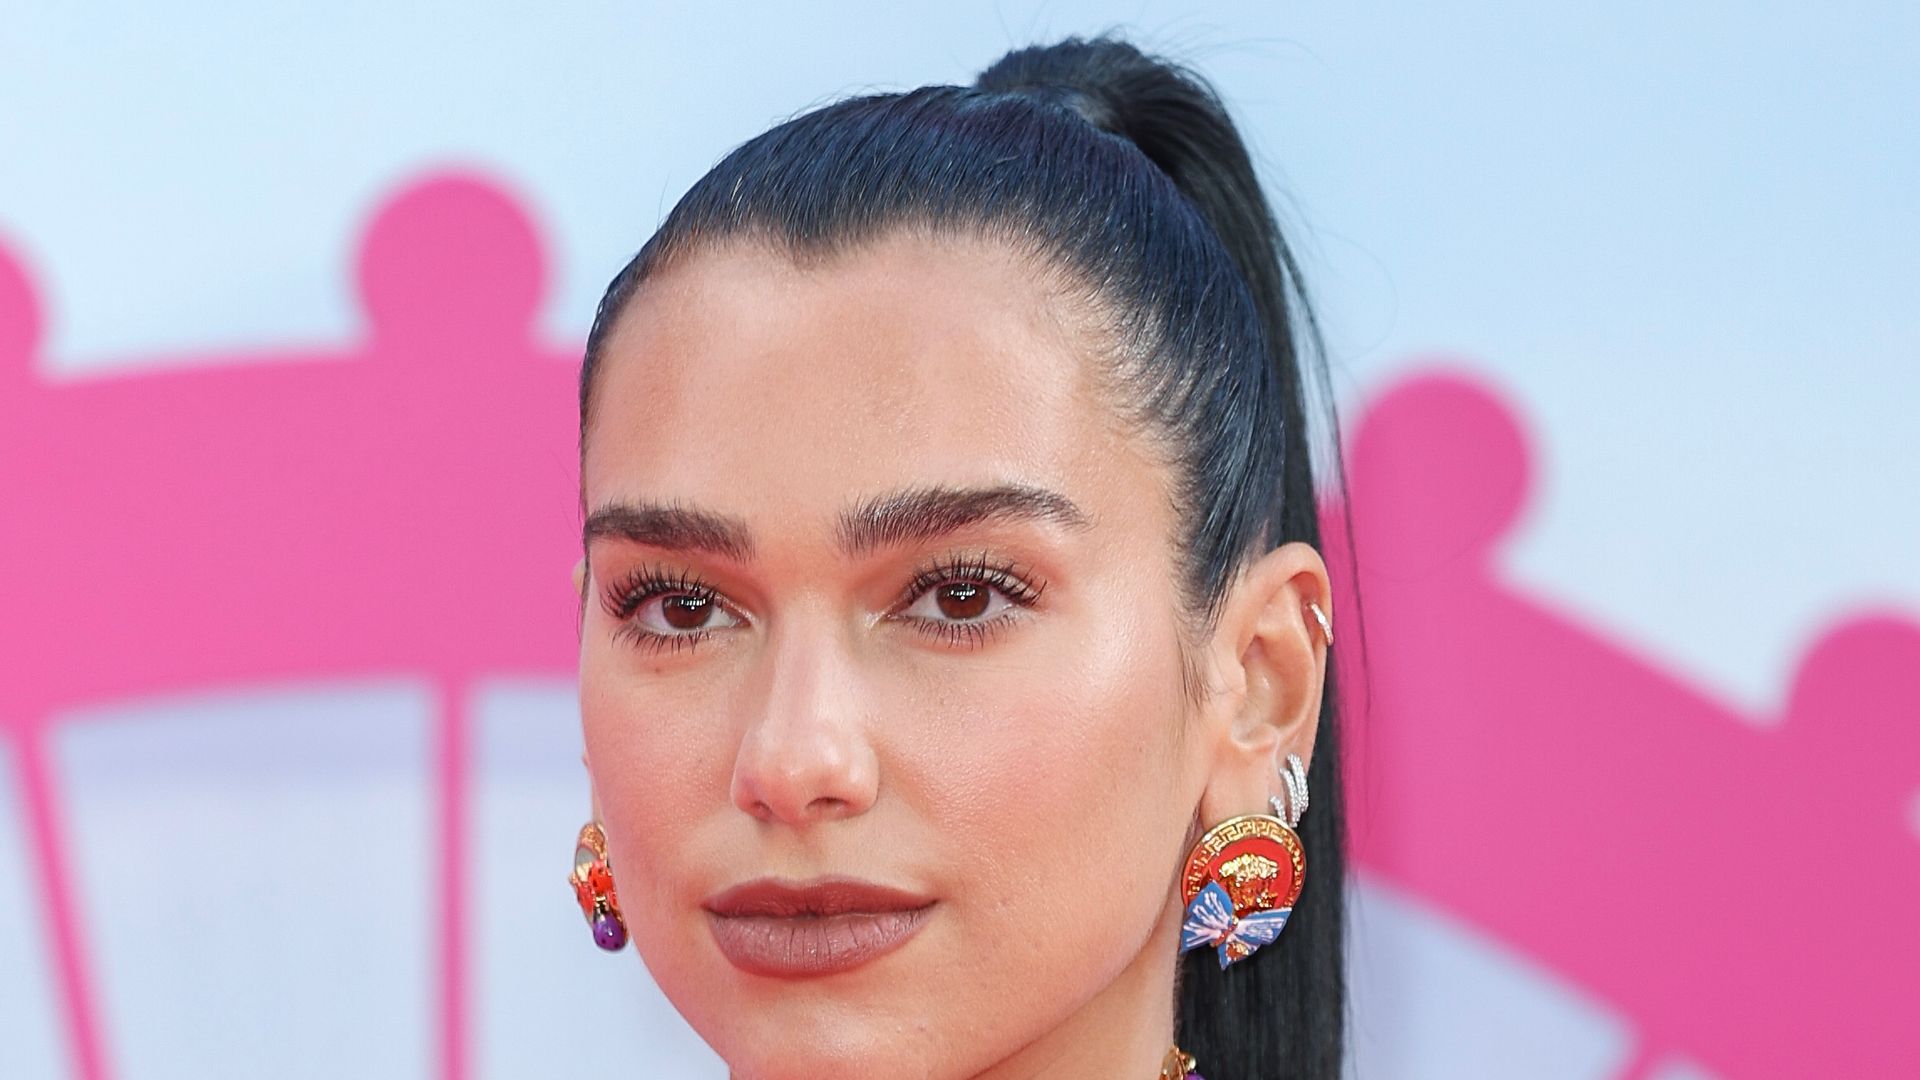  Dua Lipa attends the "Barbie" European Premiere at Cineworld Leicester Square on July 12, 2023 in London, England. (Photo by Mike Marsland/WireImage)